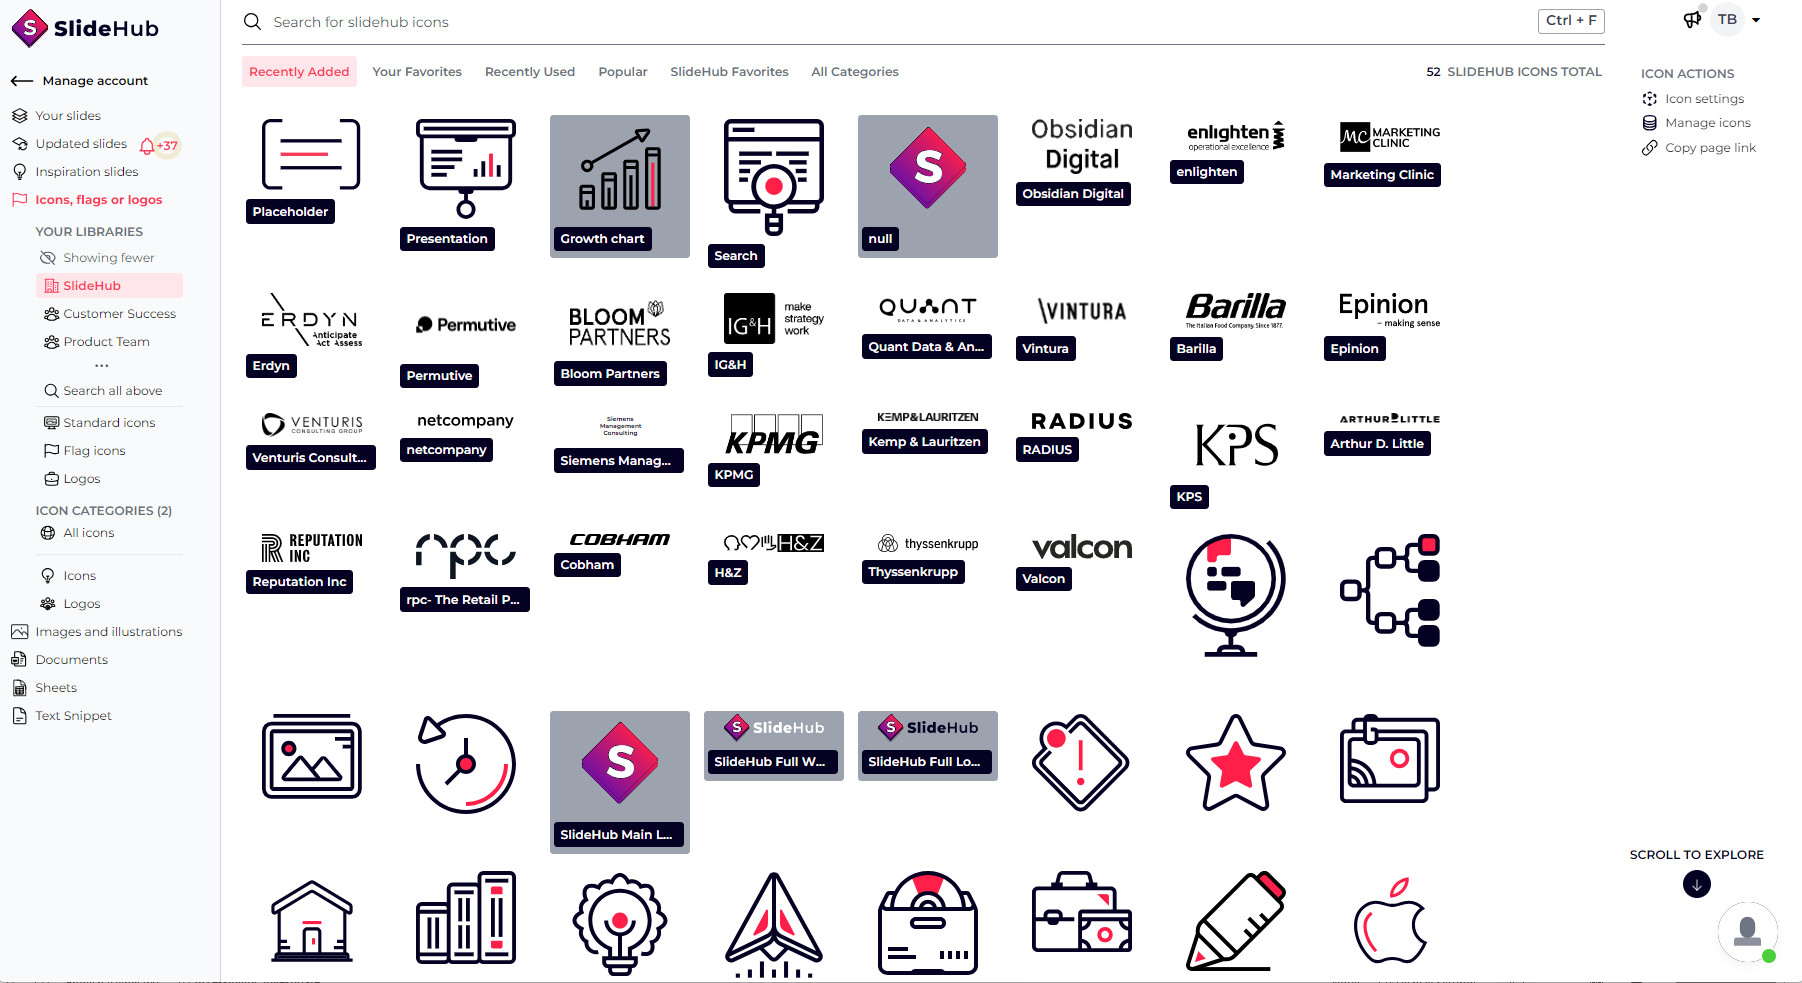 Manage company icons and images or access consistent standard icons, flags, logos and images